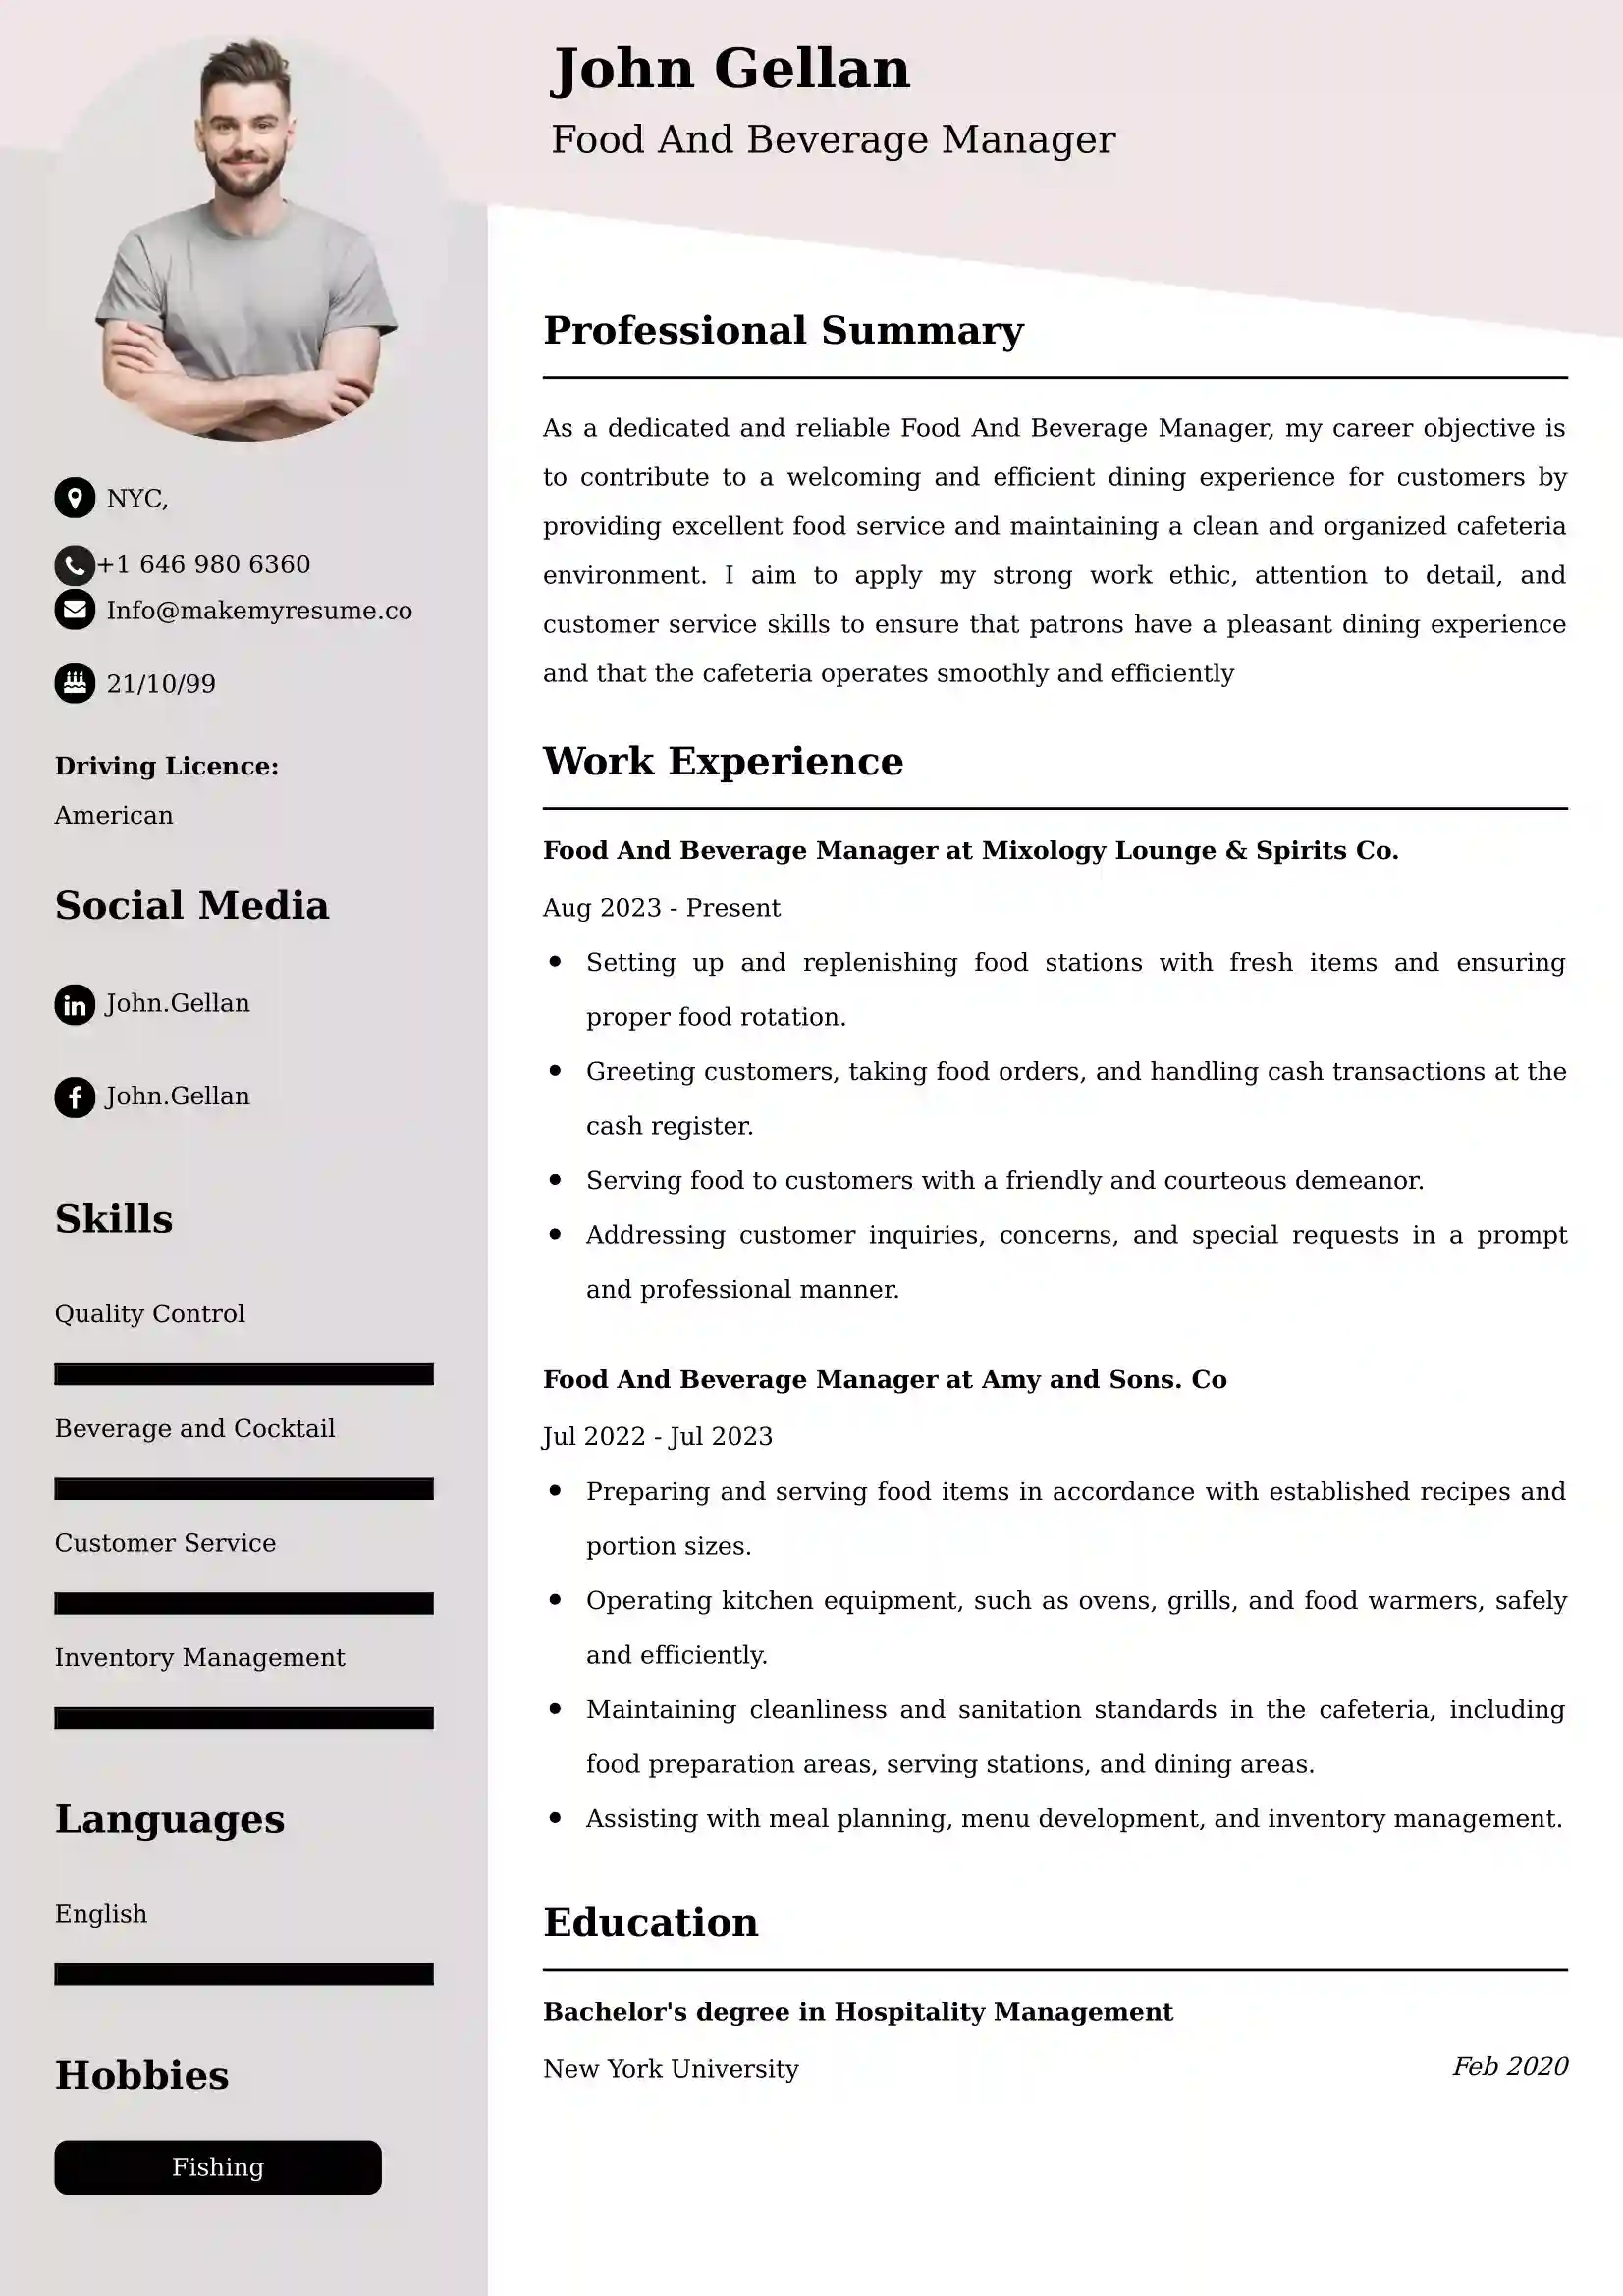 Food And Beverage Server Resume Examples - UK Format, Latest Template.